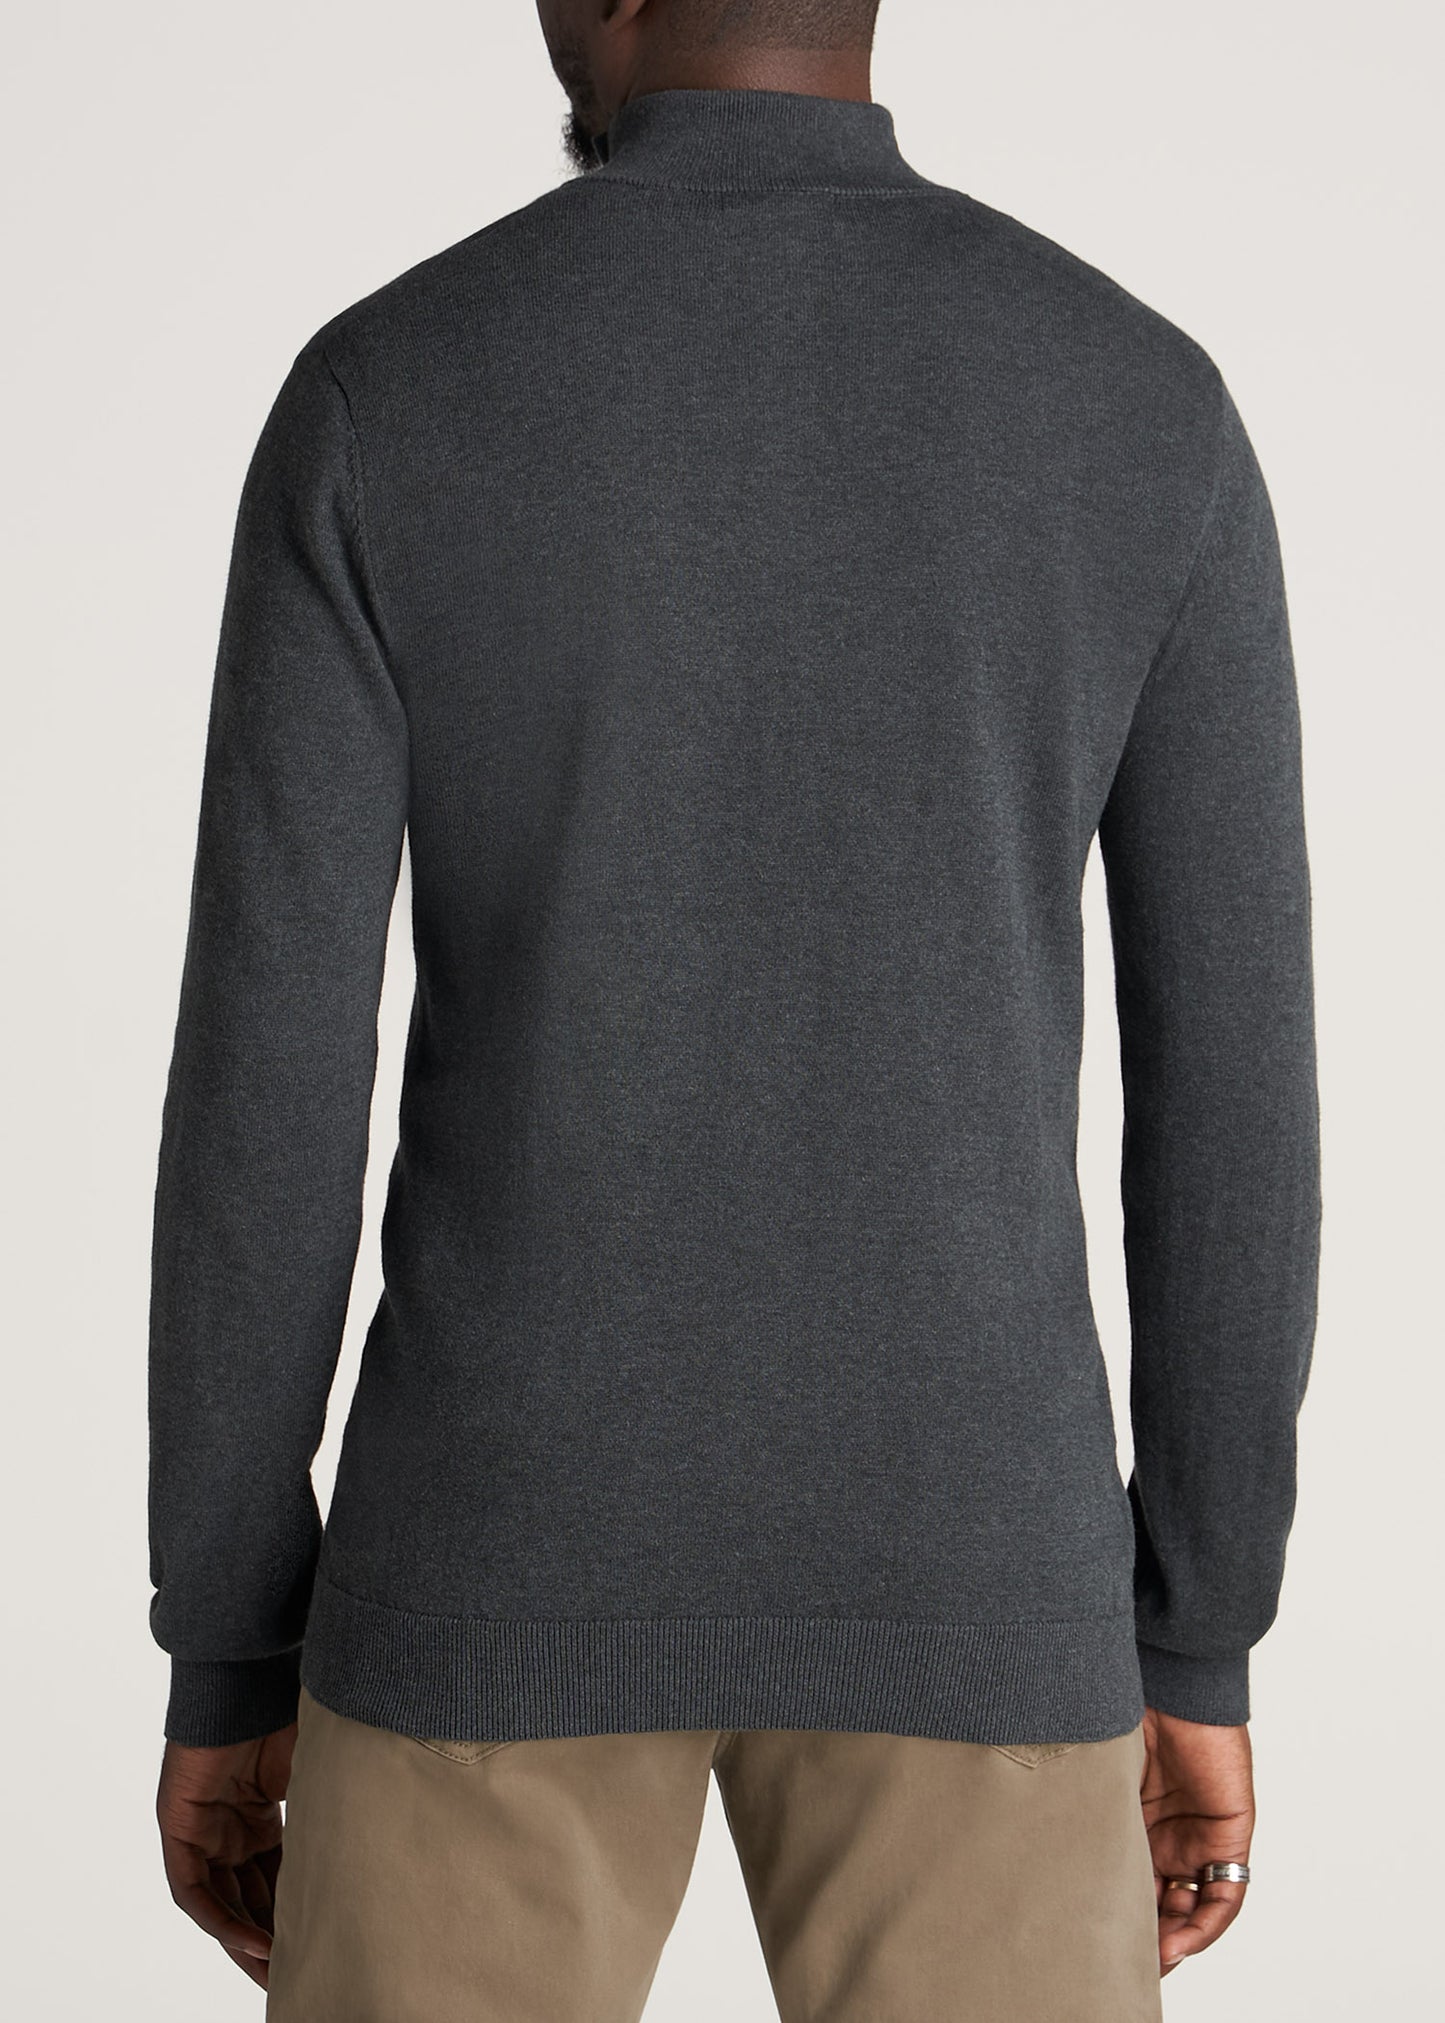 Men's Tall Everyday Quarter Zip Sweater Charcoal Mix – American Tall